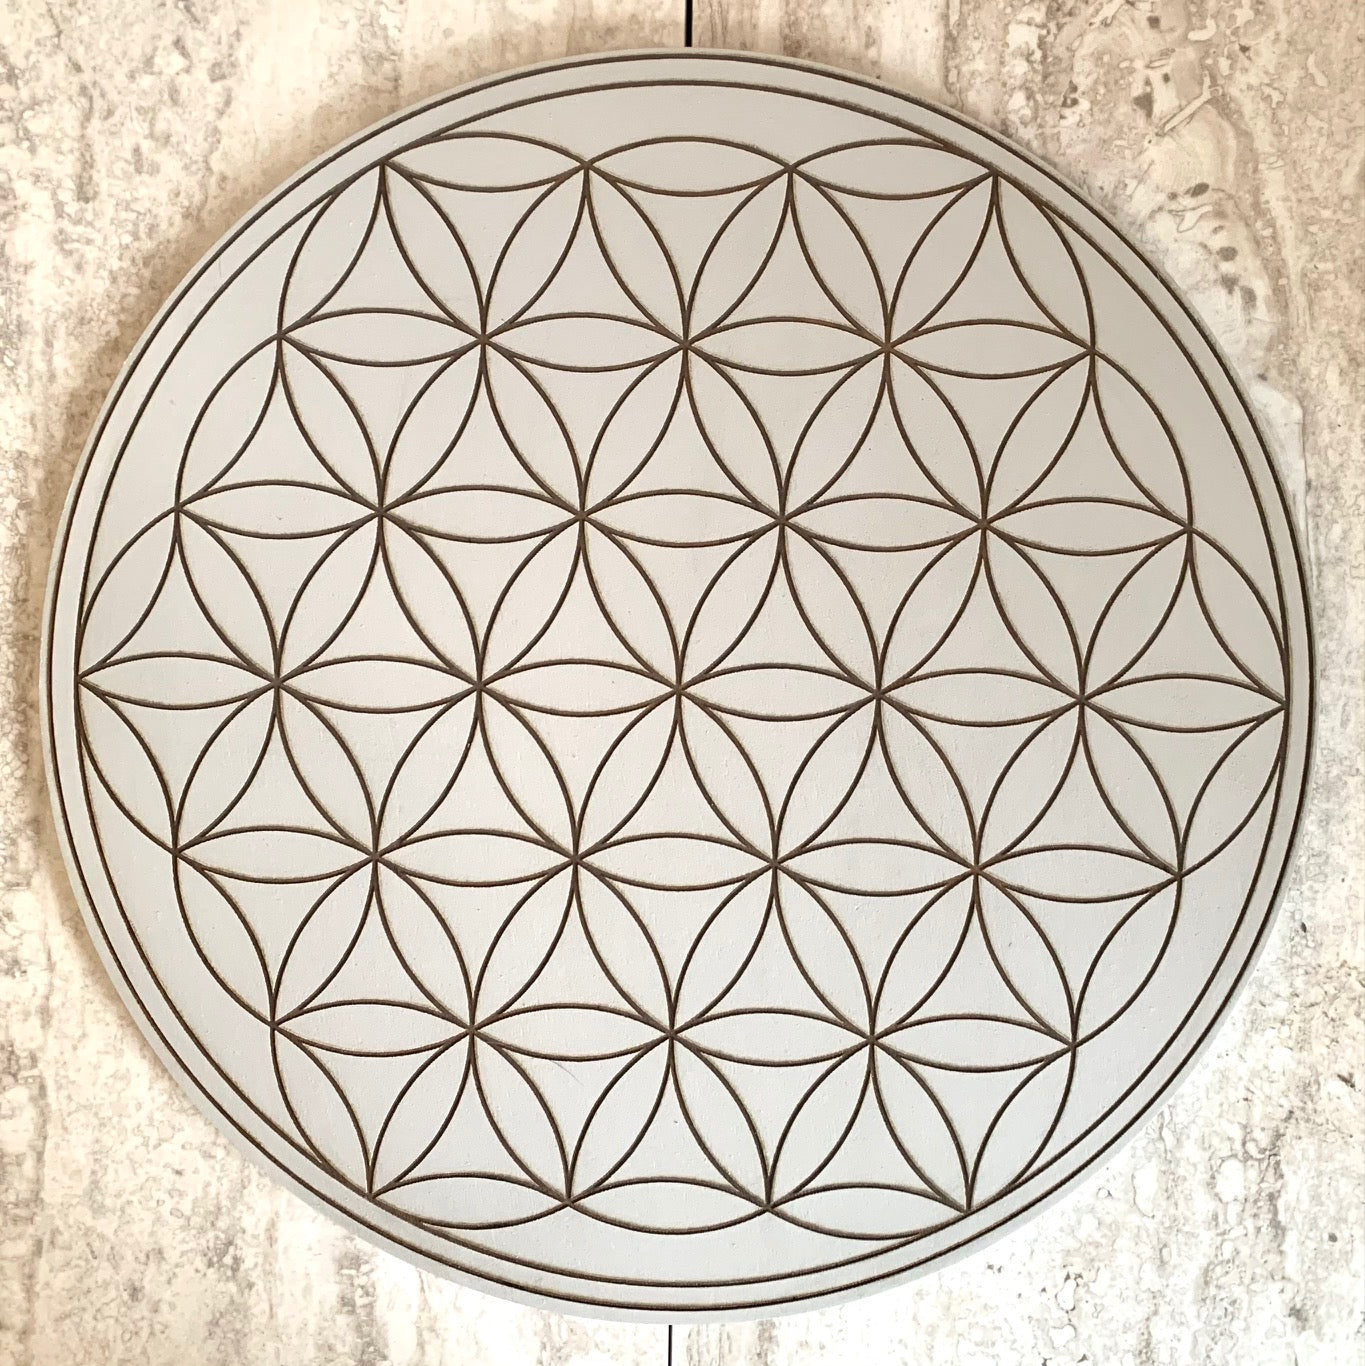 Flower of Life Crystal Grid - Made to Order